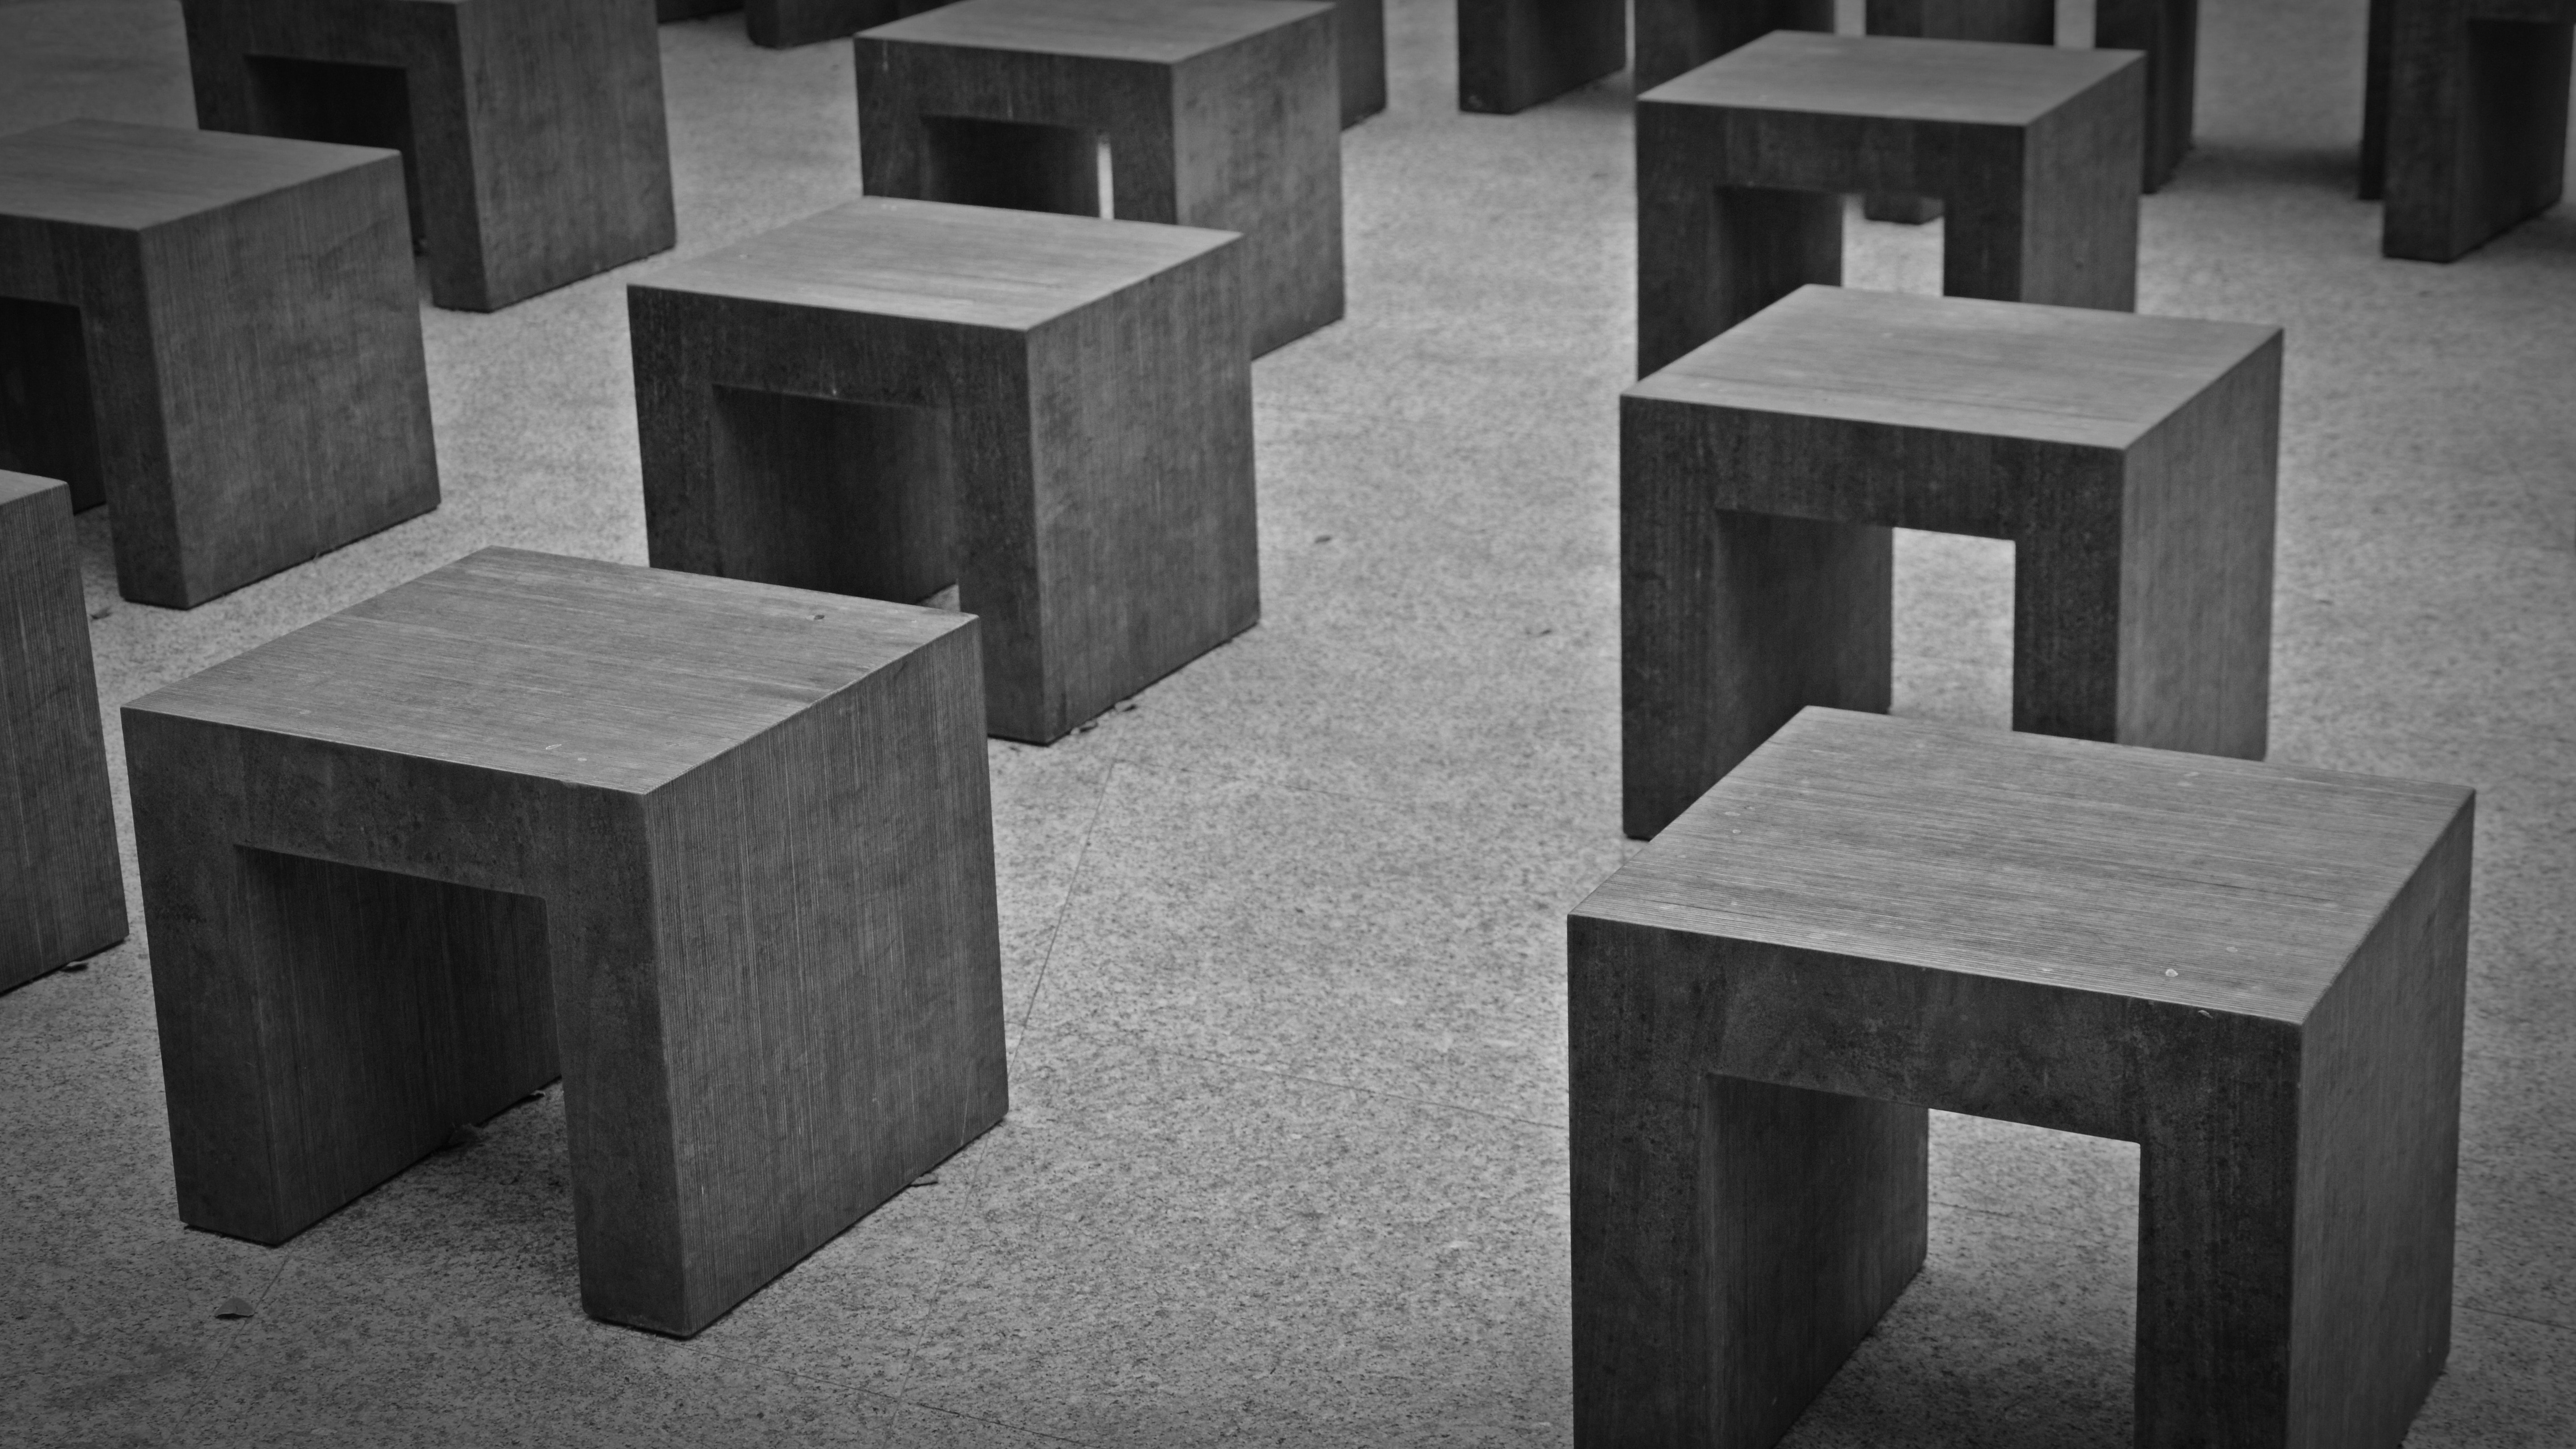 grayscale photo of wooden end tables